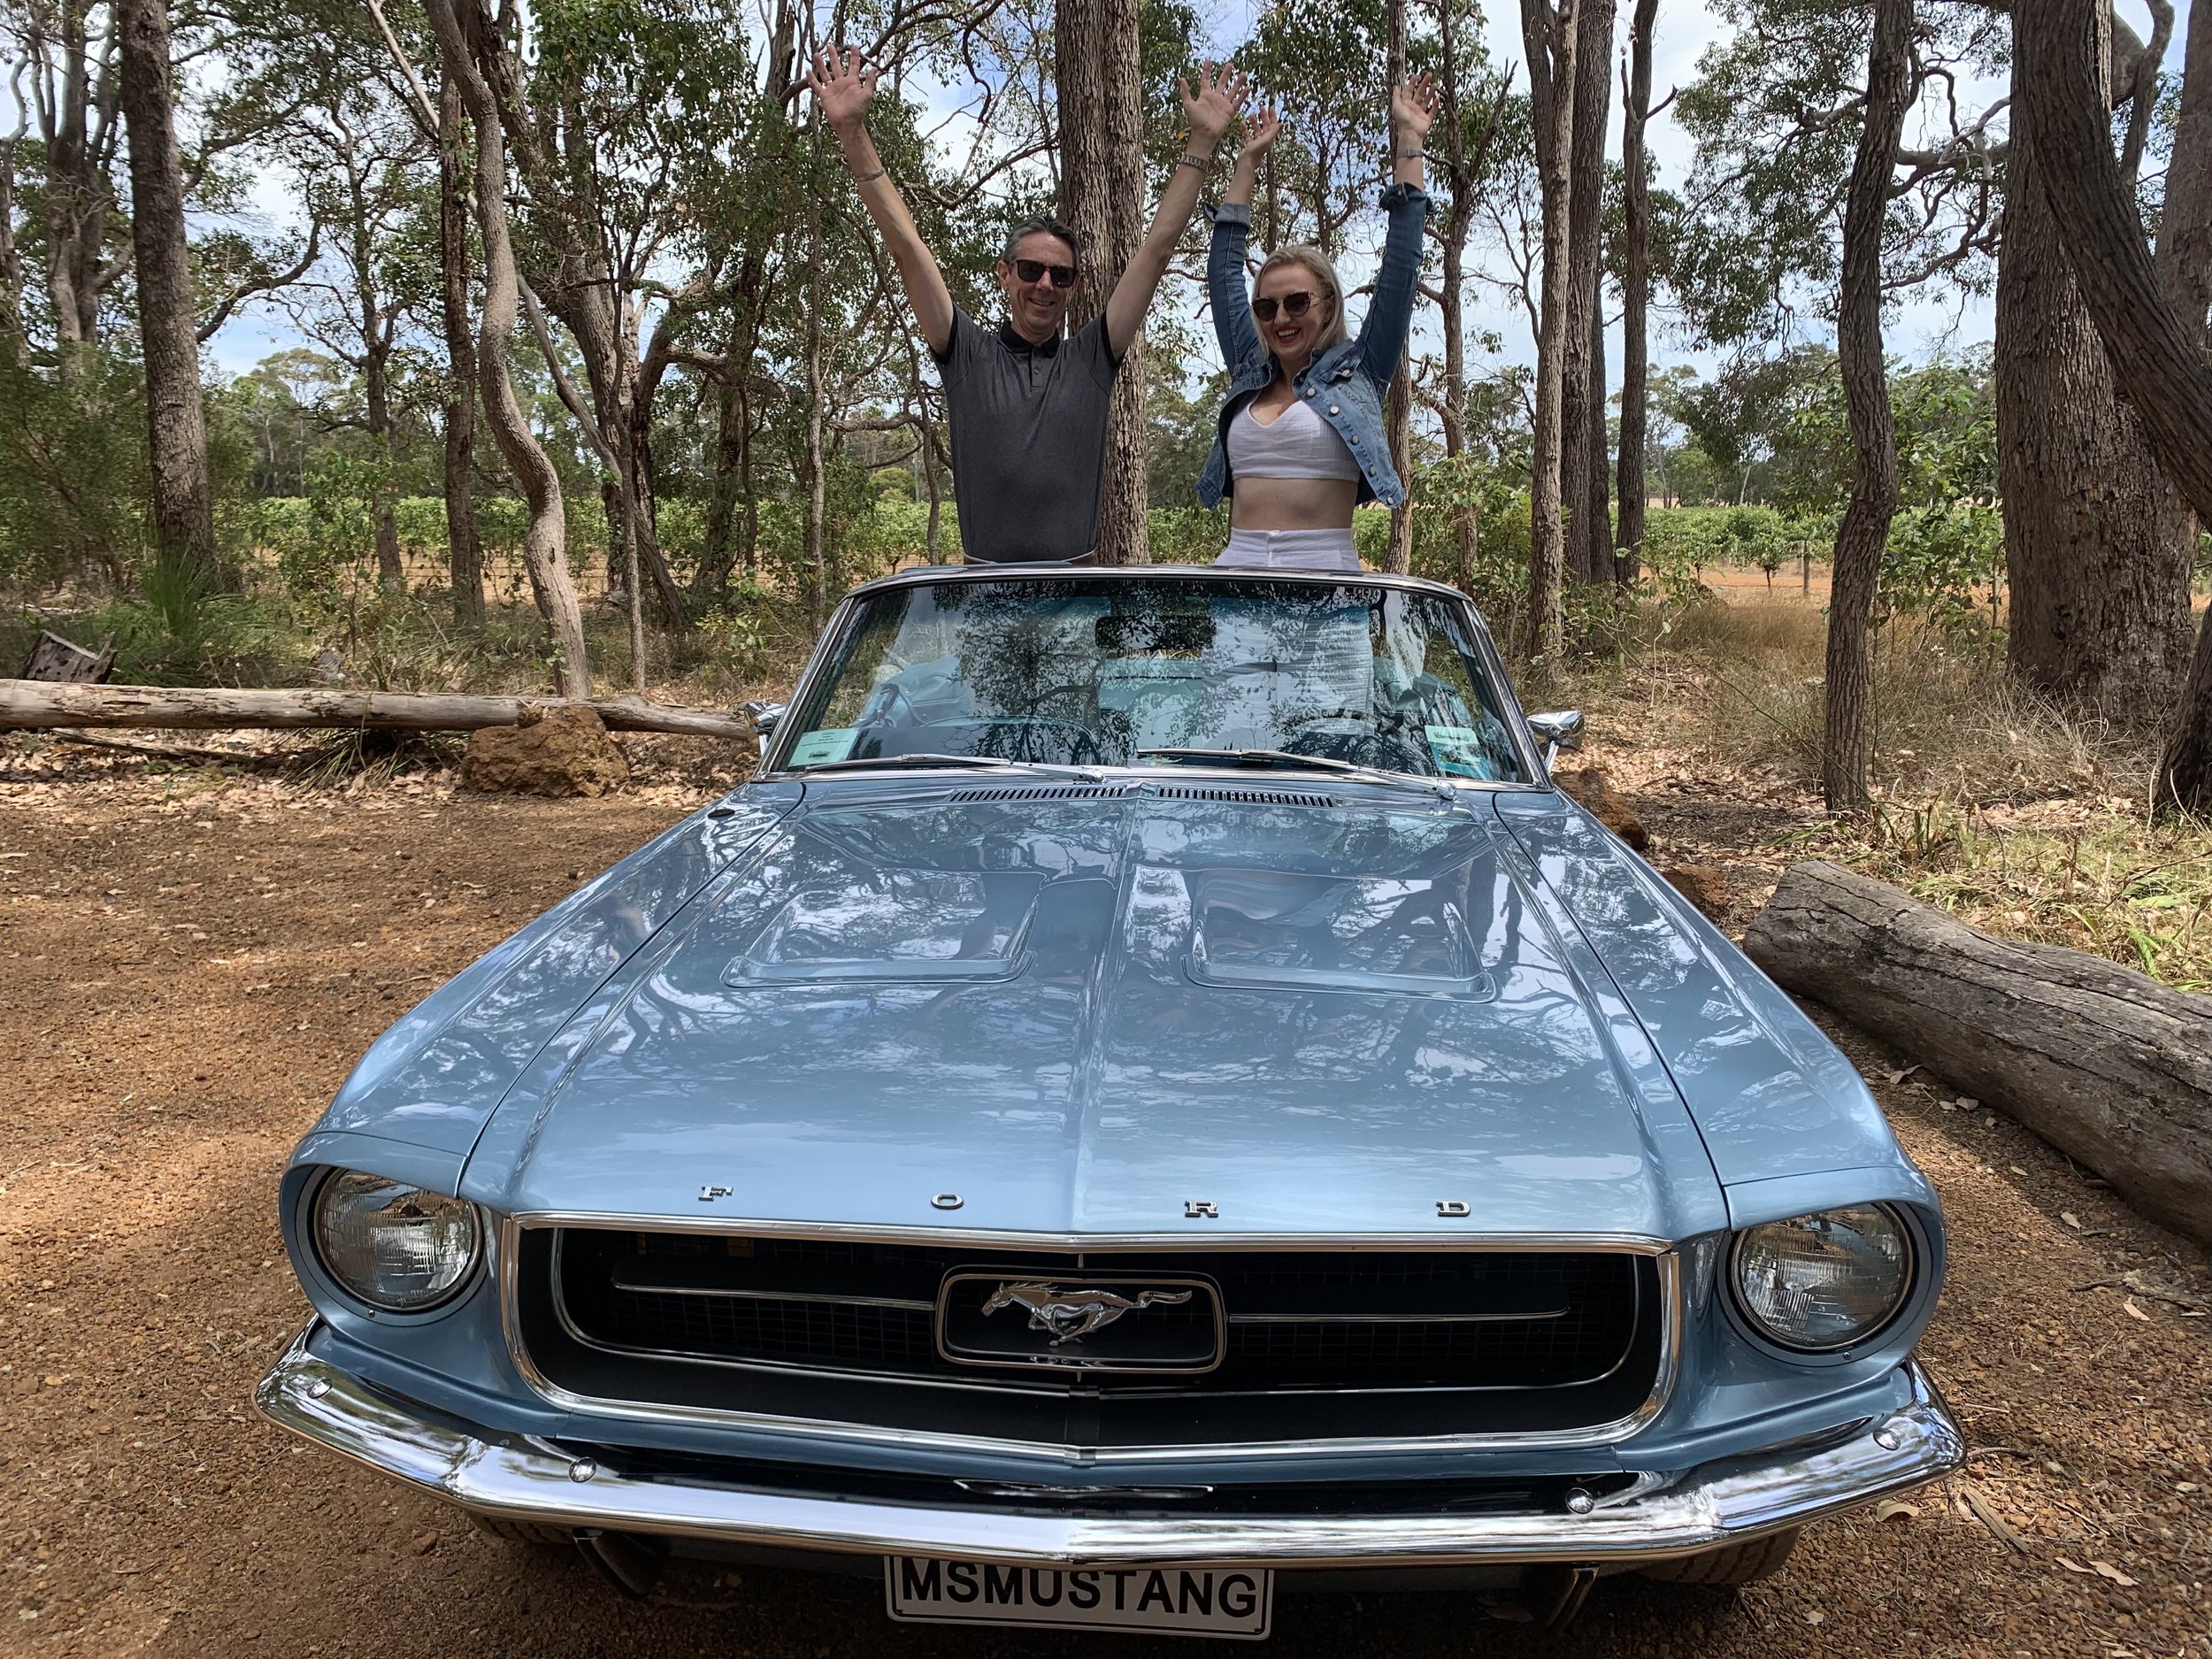 mr mustang hire-private wine tour-luxe it up package-classic car-margaret river-driver-chauffeur7.JPG